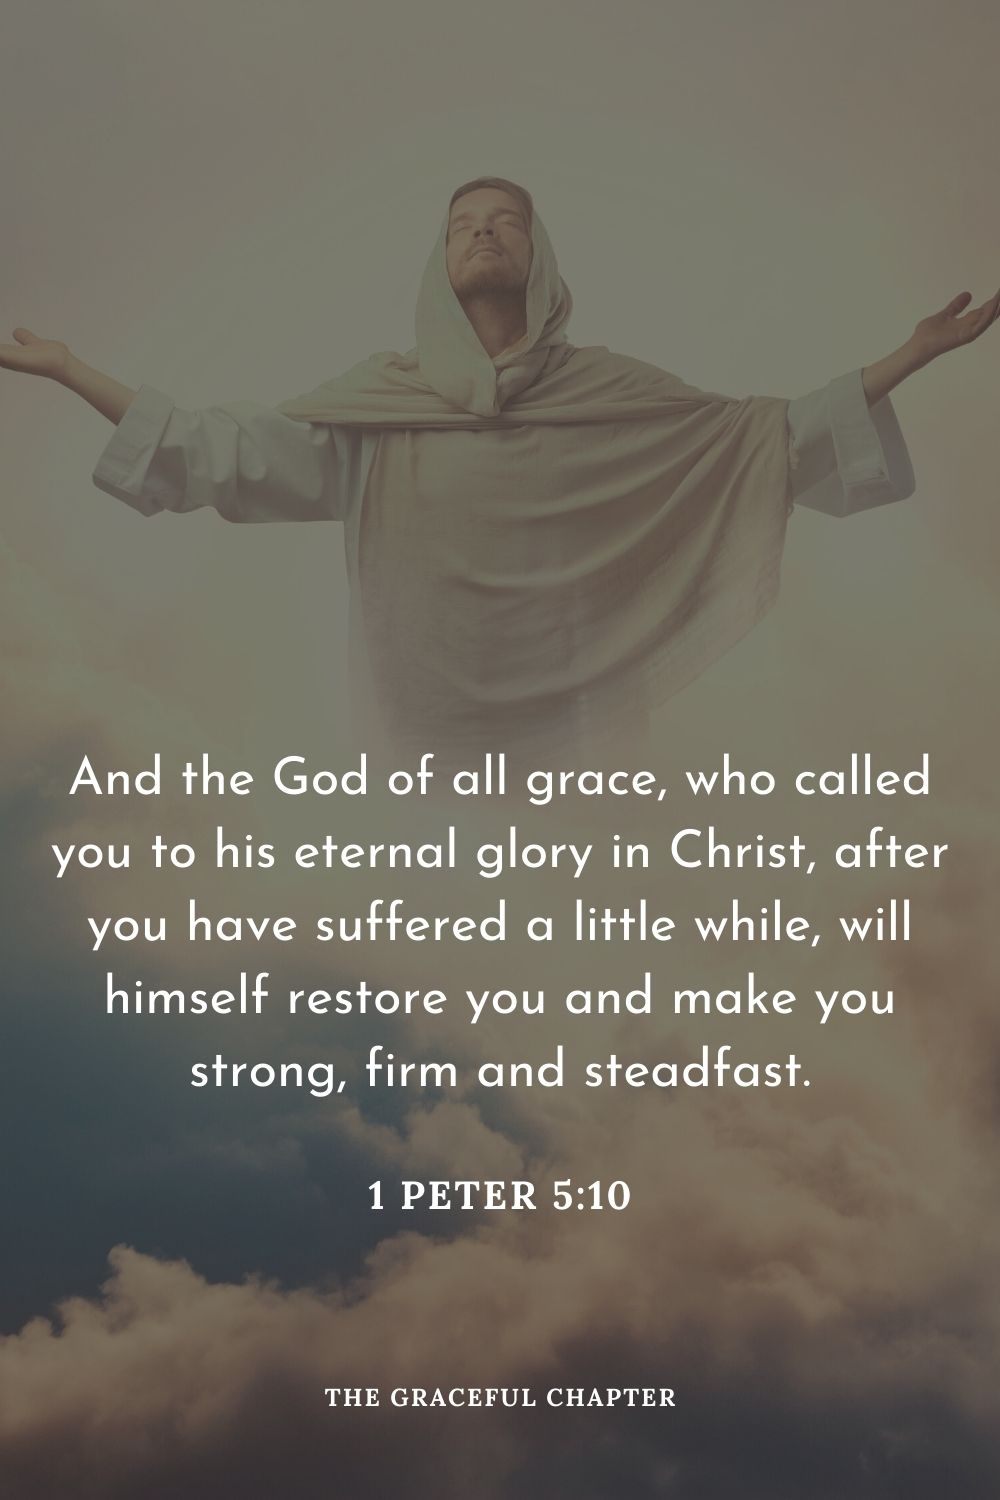 And the God of all grace, who called you to his eternal glory in Christ, after you have suffered a little while, will himself restore you and make you strong, firm and steadfast.